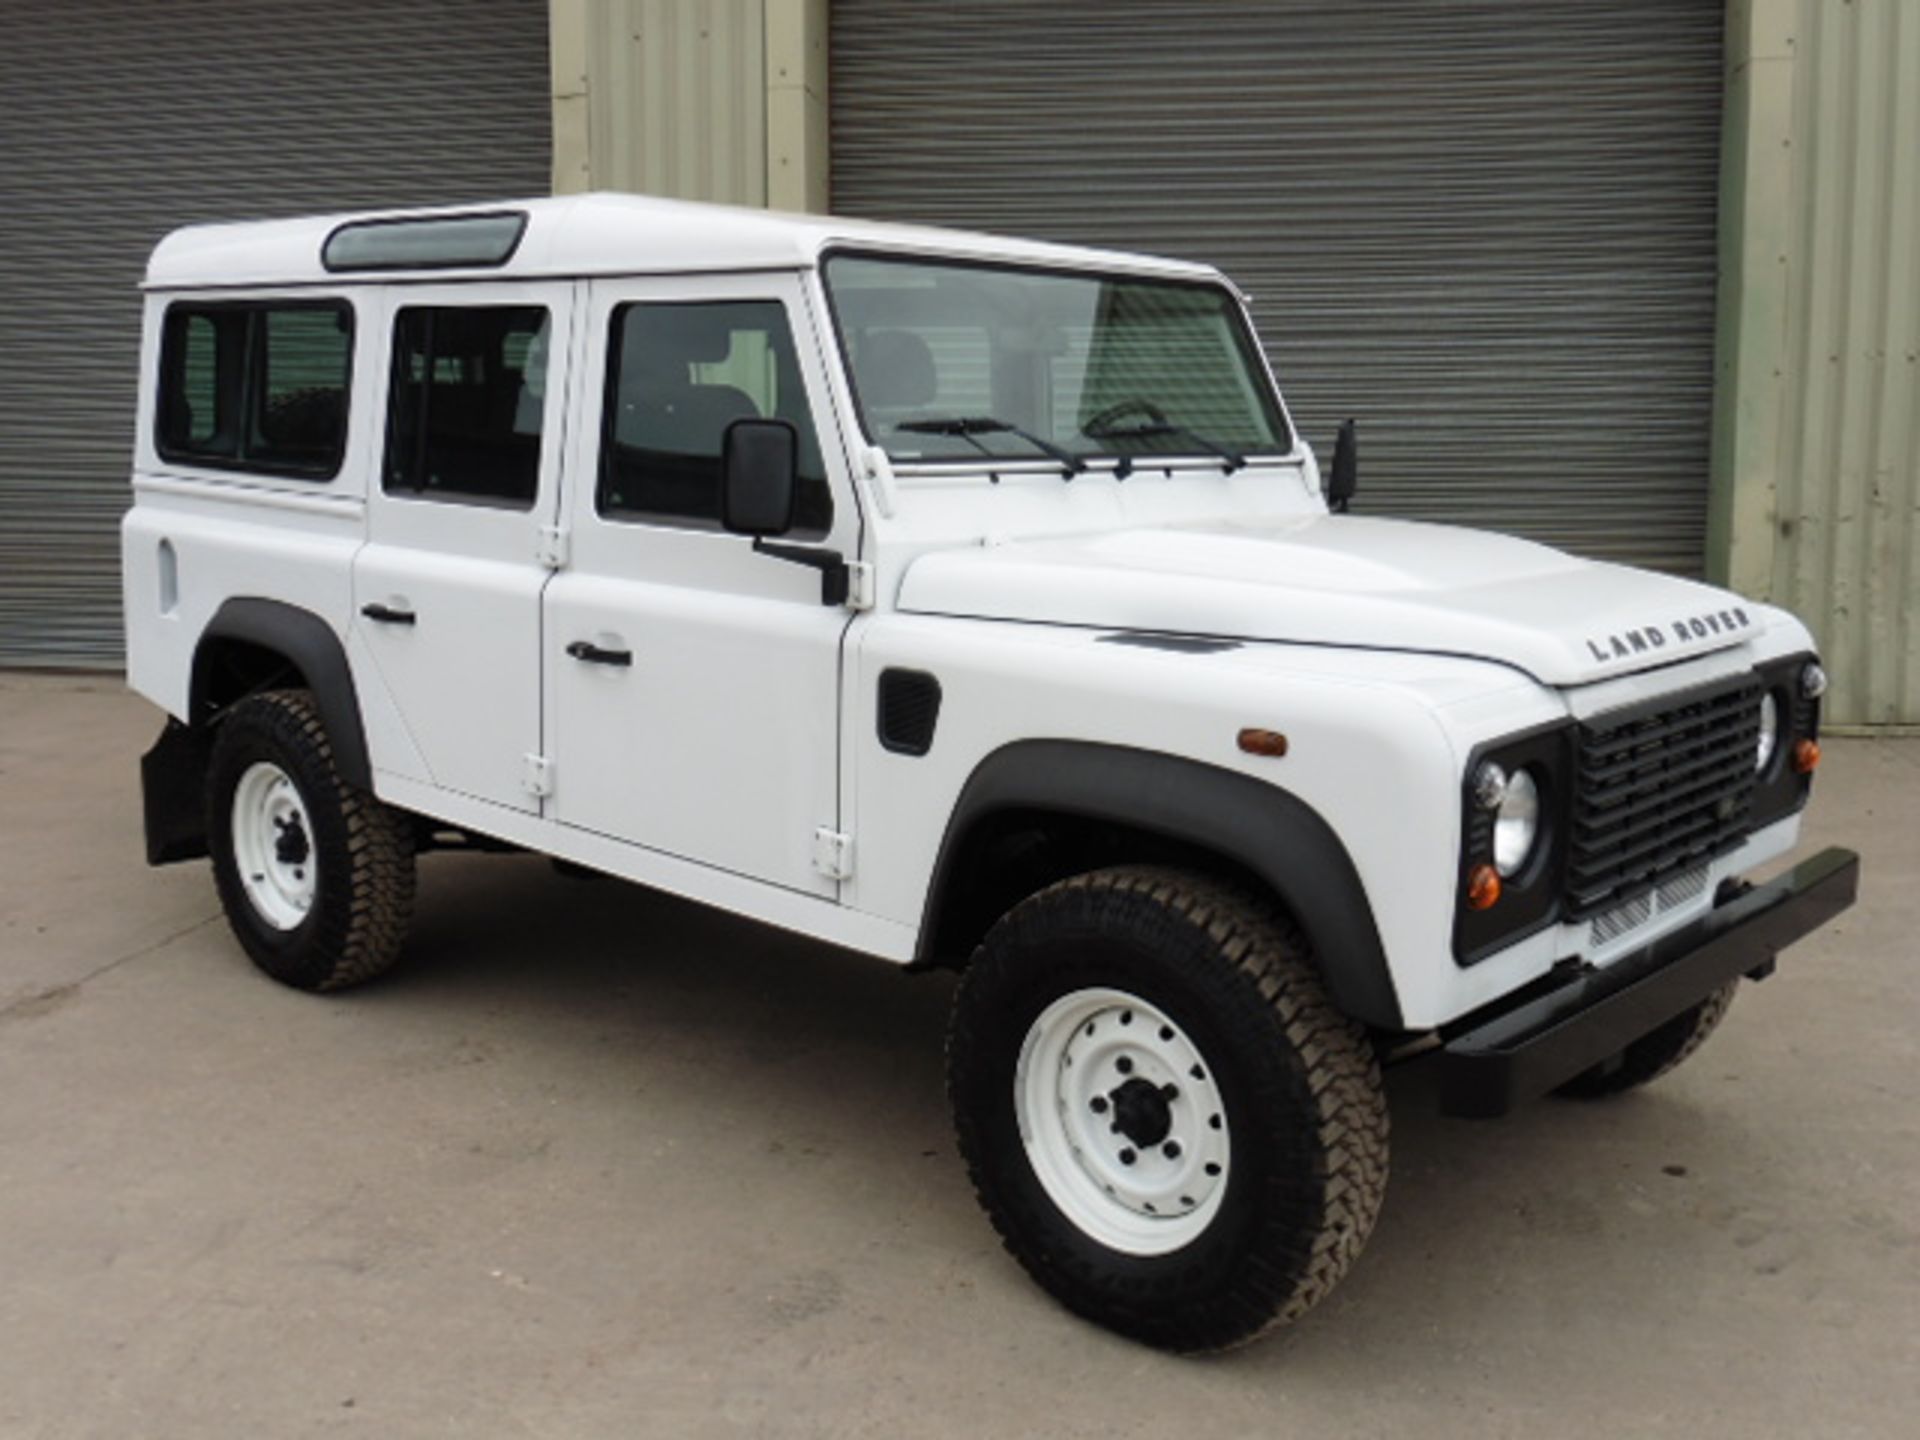 Delivery Mileage 2013 model year Land Rover Defender 110 5 door station wagon LHD